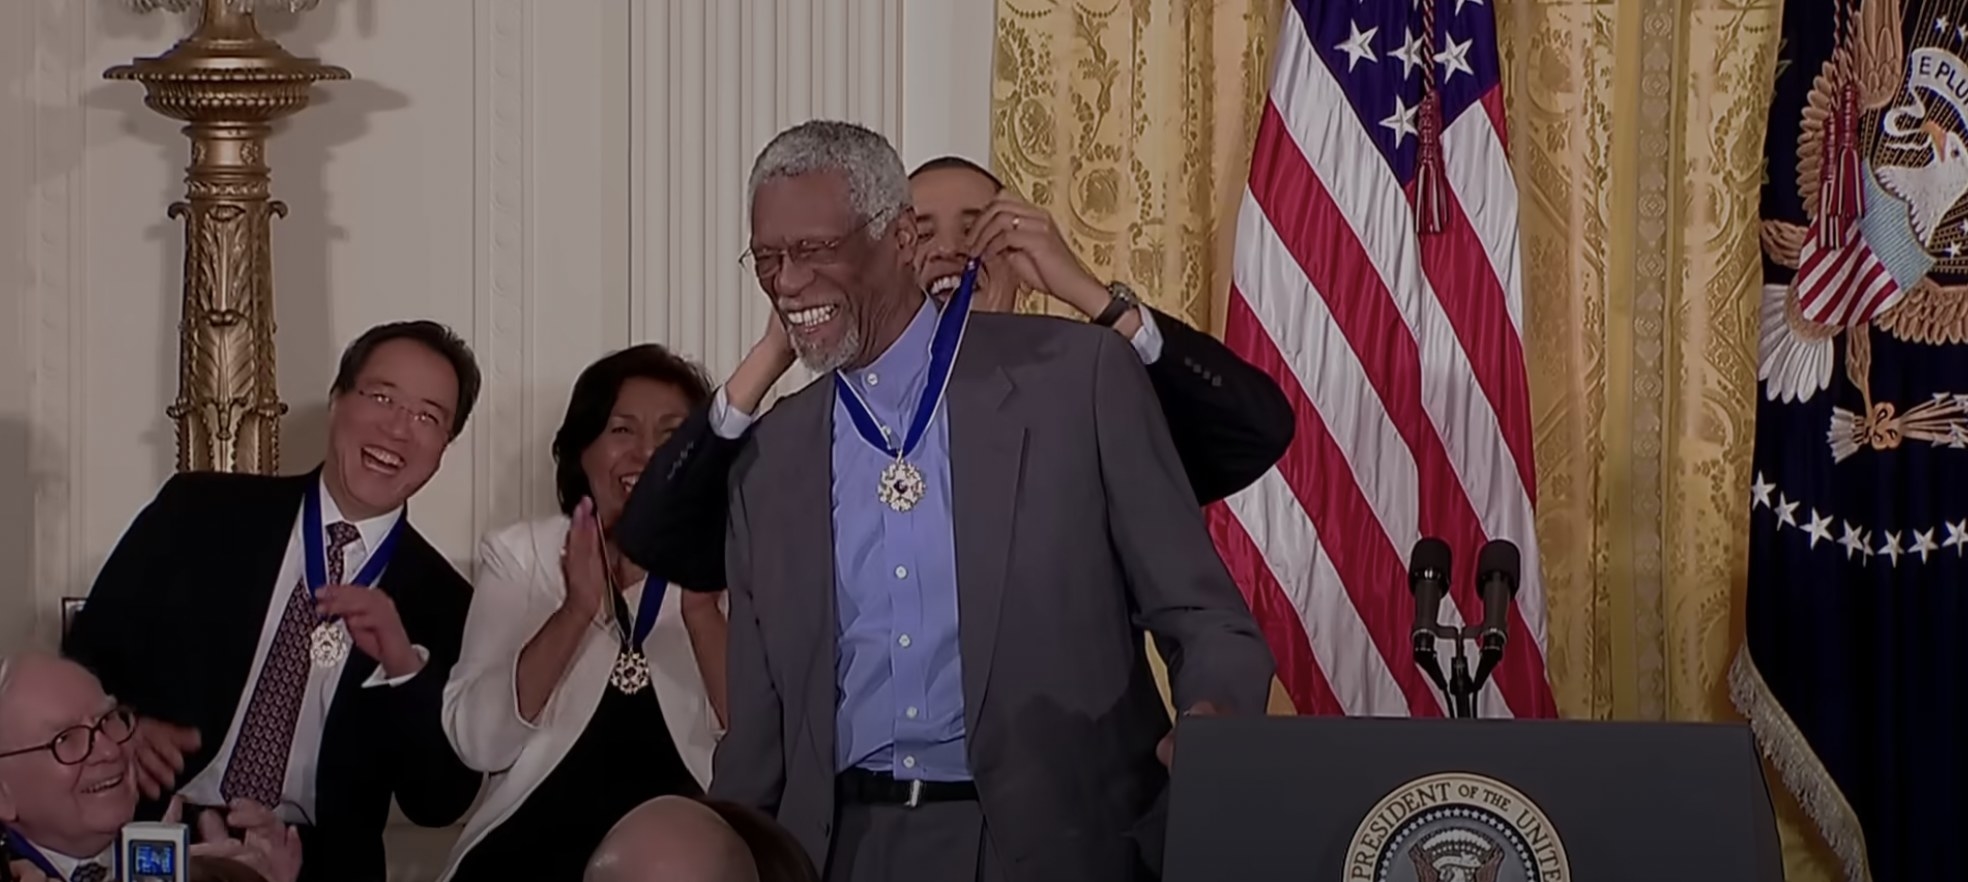 Bill Russell receives the Medal of Freedom